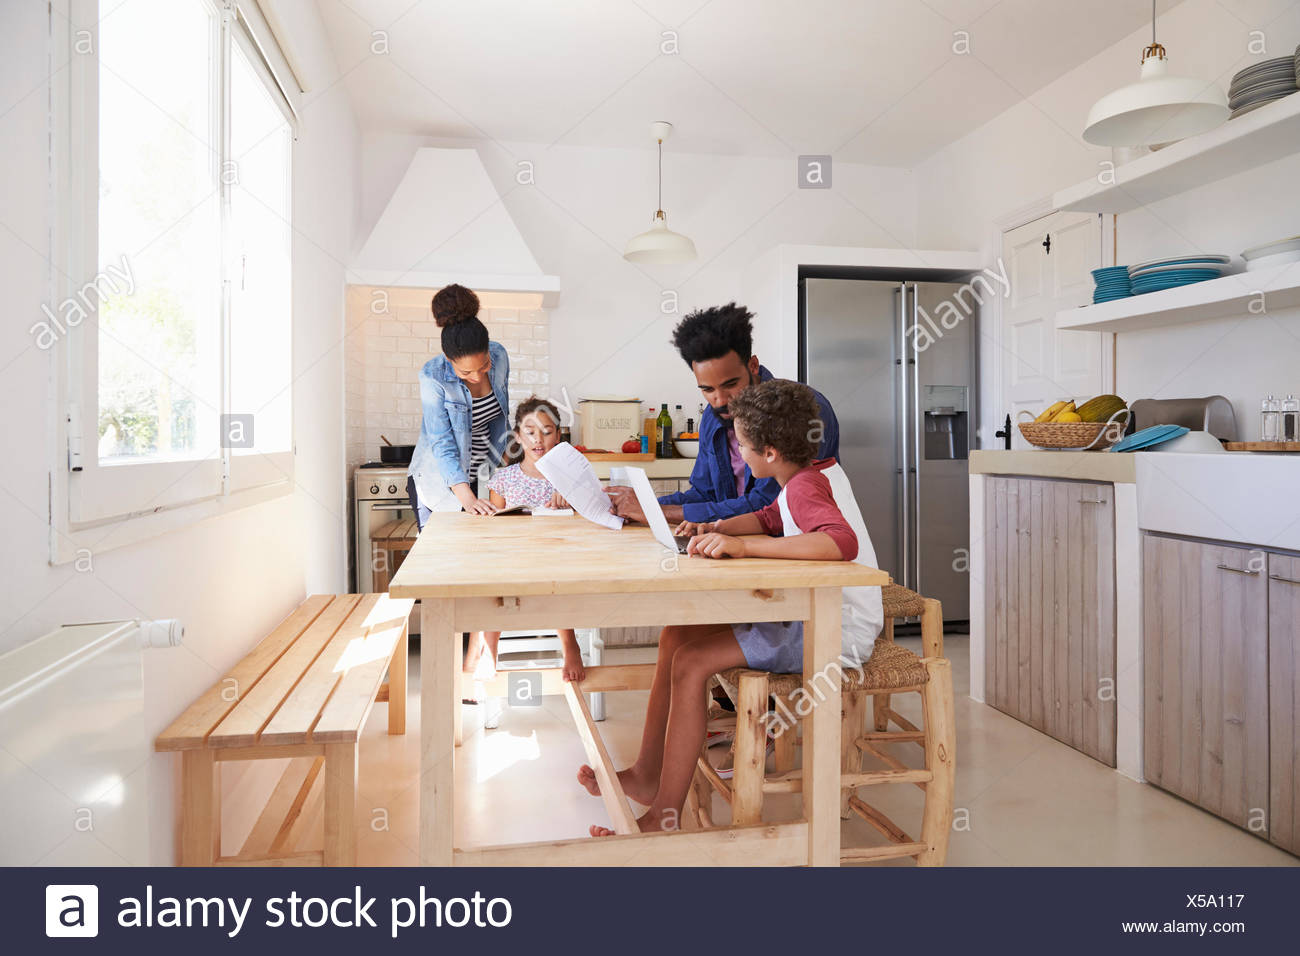 Mum And Dad Help Their Kids With Homework At Kitchen Table Stock